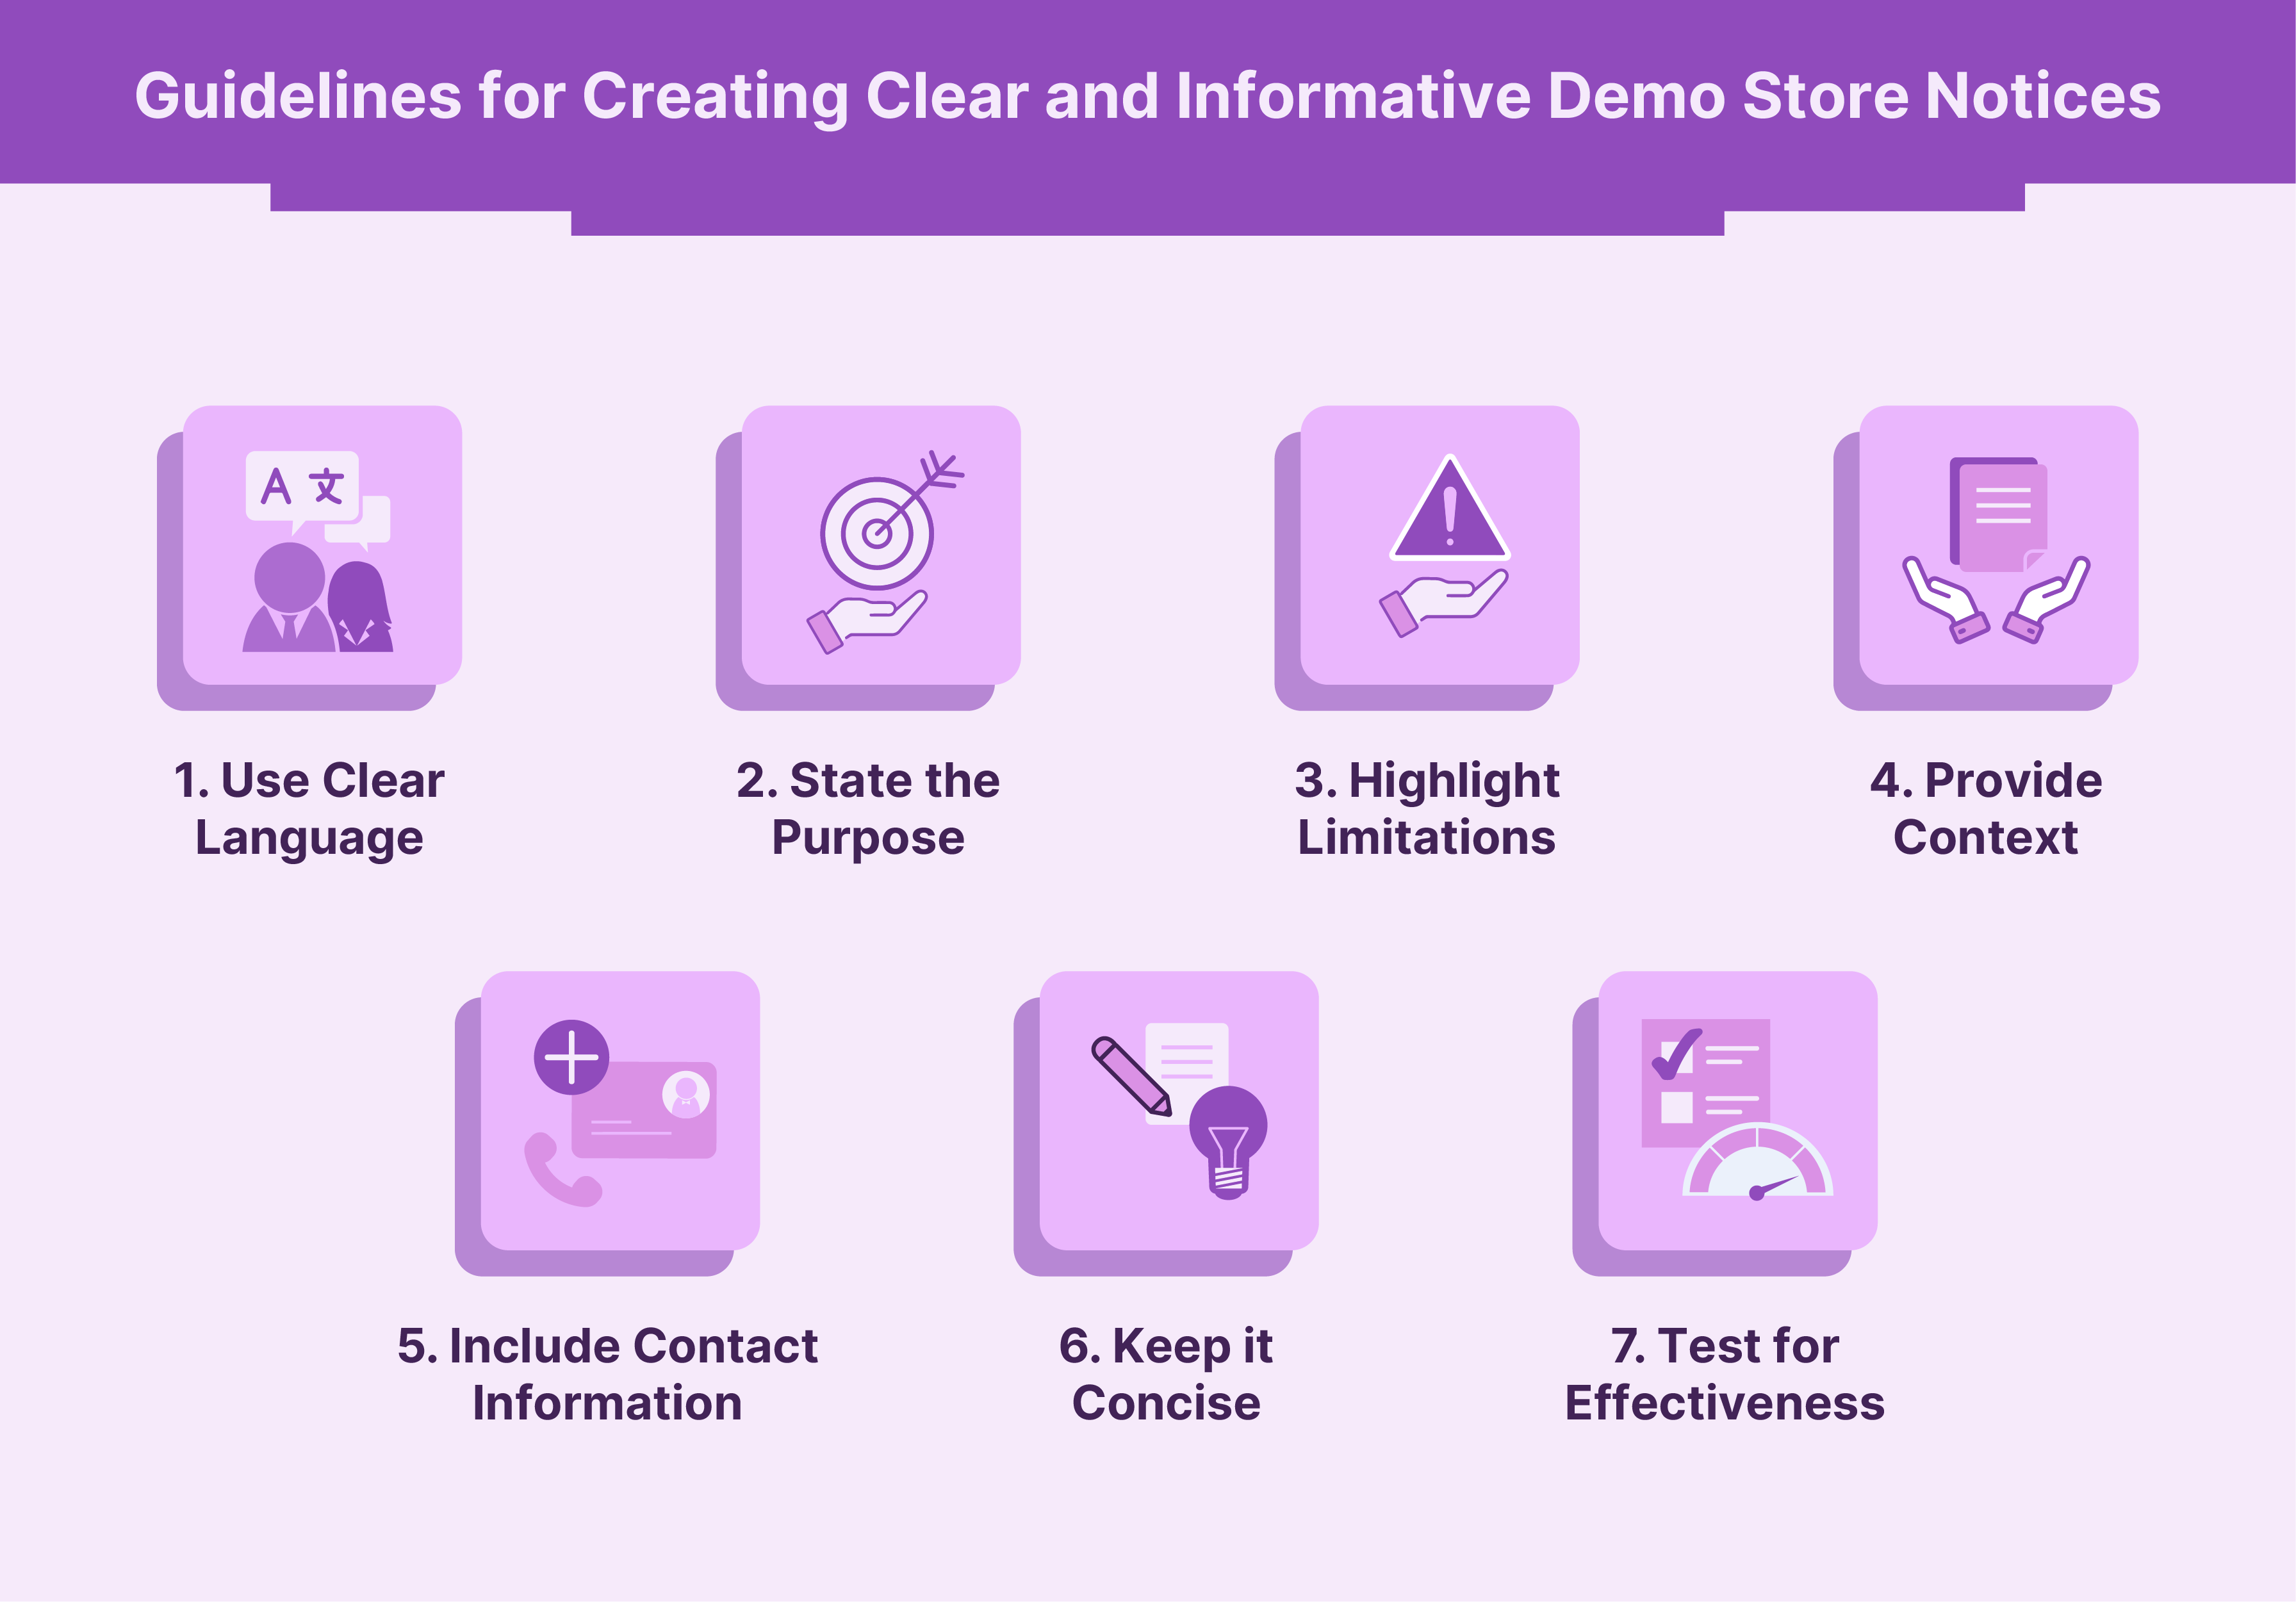 Guidelines for Creating Clear and Informative Demo Store Notices